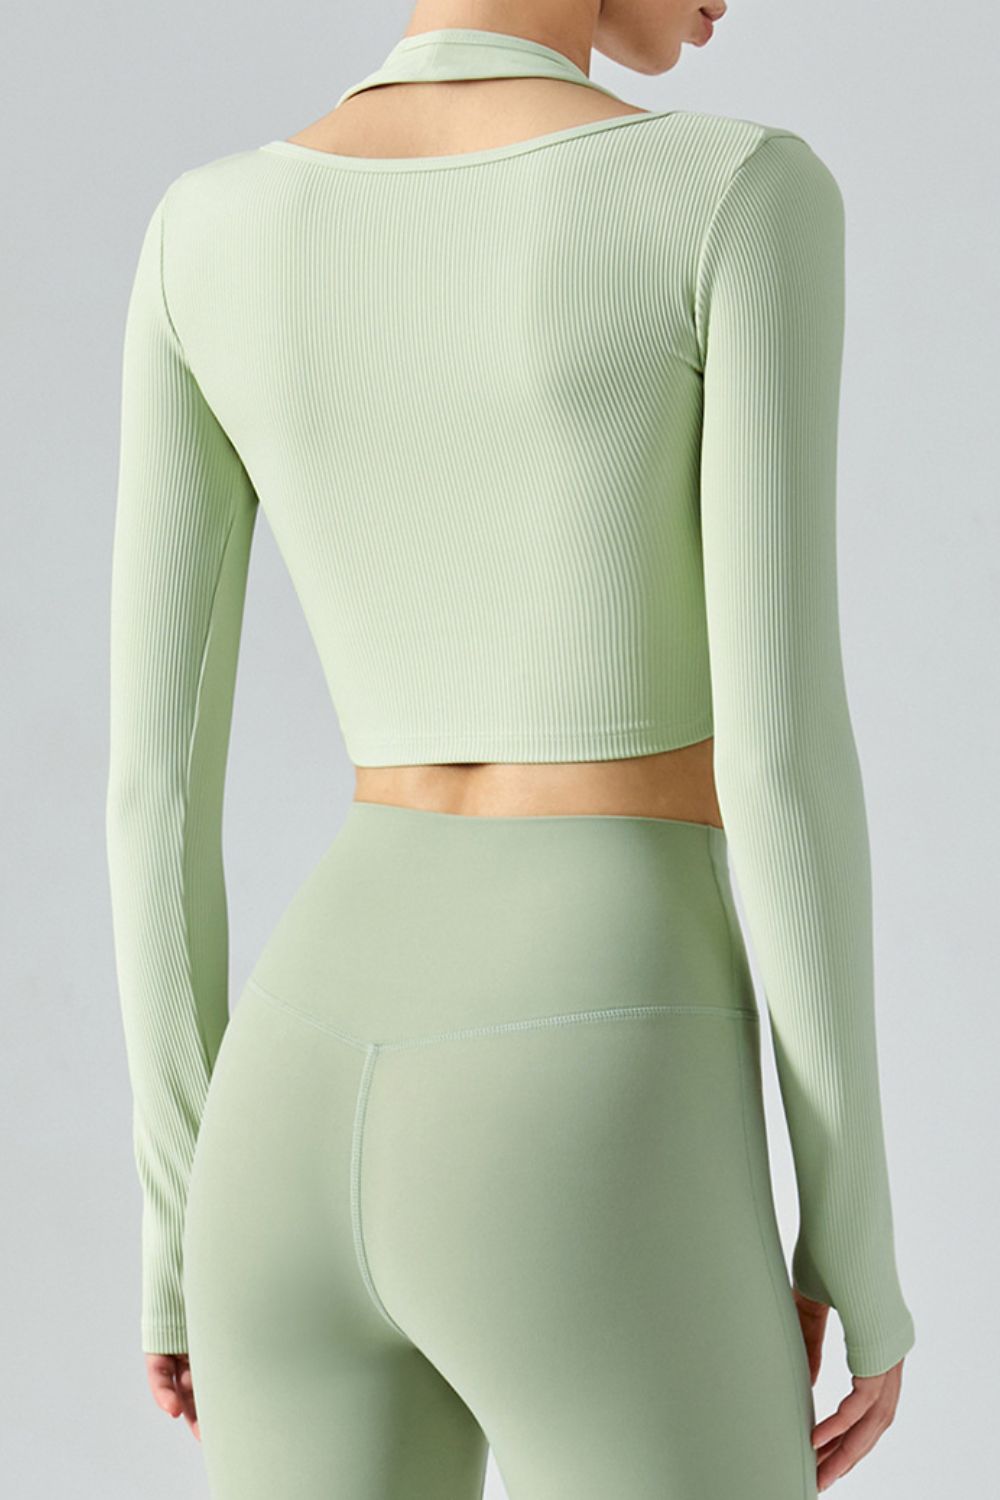 Ribbed Faux Layered Halter Neck Cropped Sports Top - DromedarShop.com Online Boutique